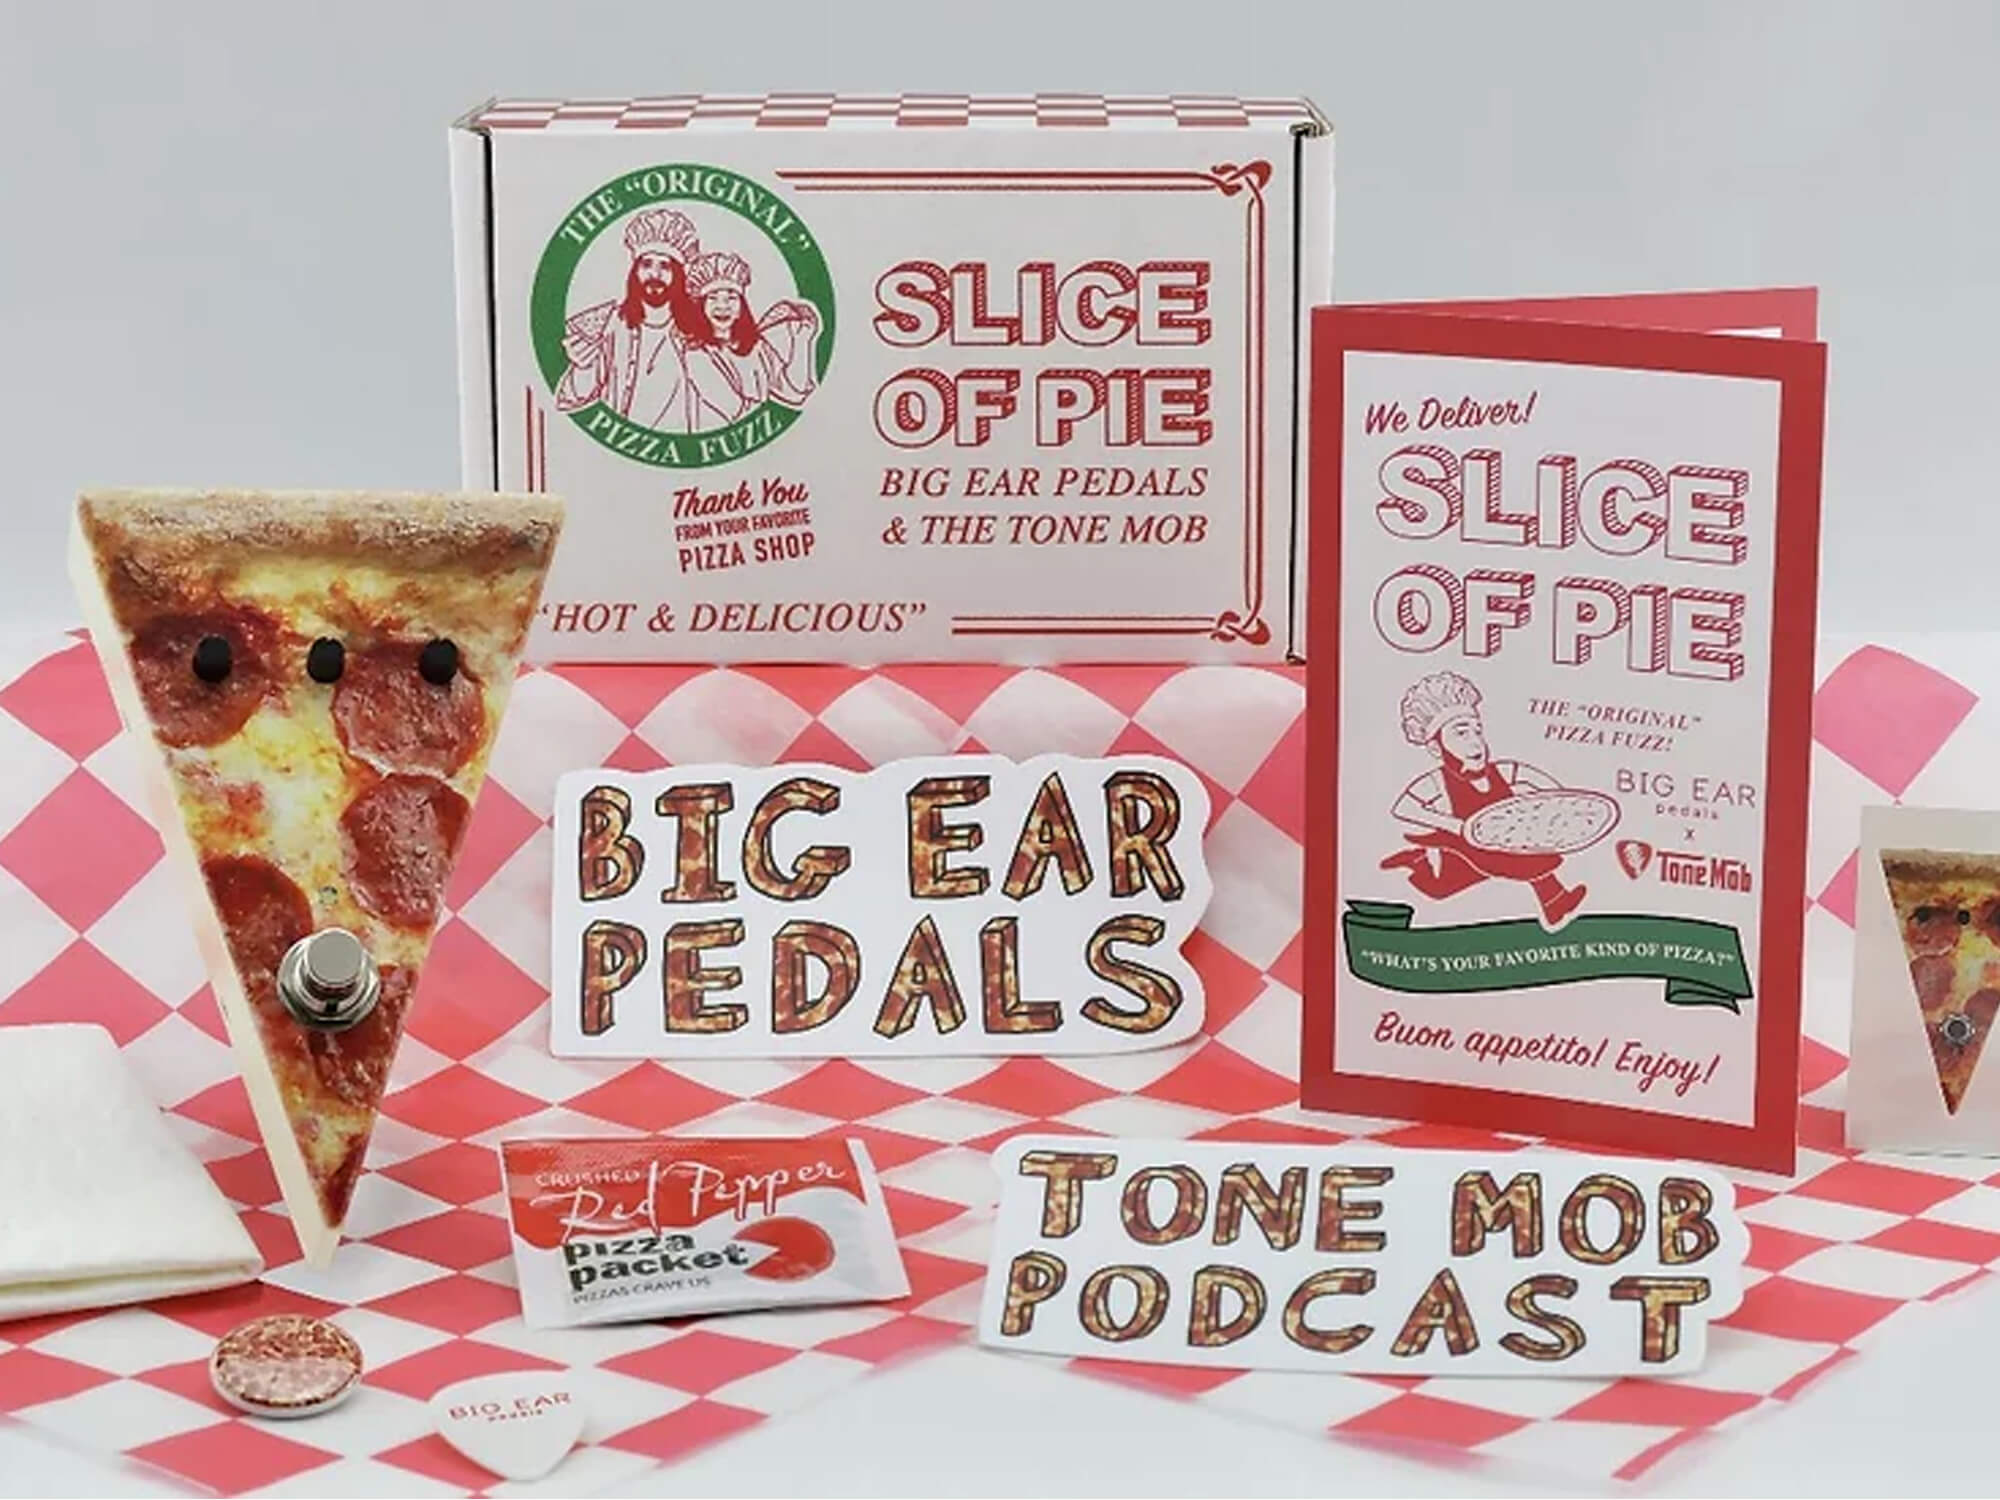 Big Ear Pedals Slice Of Pie